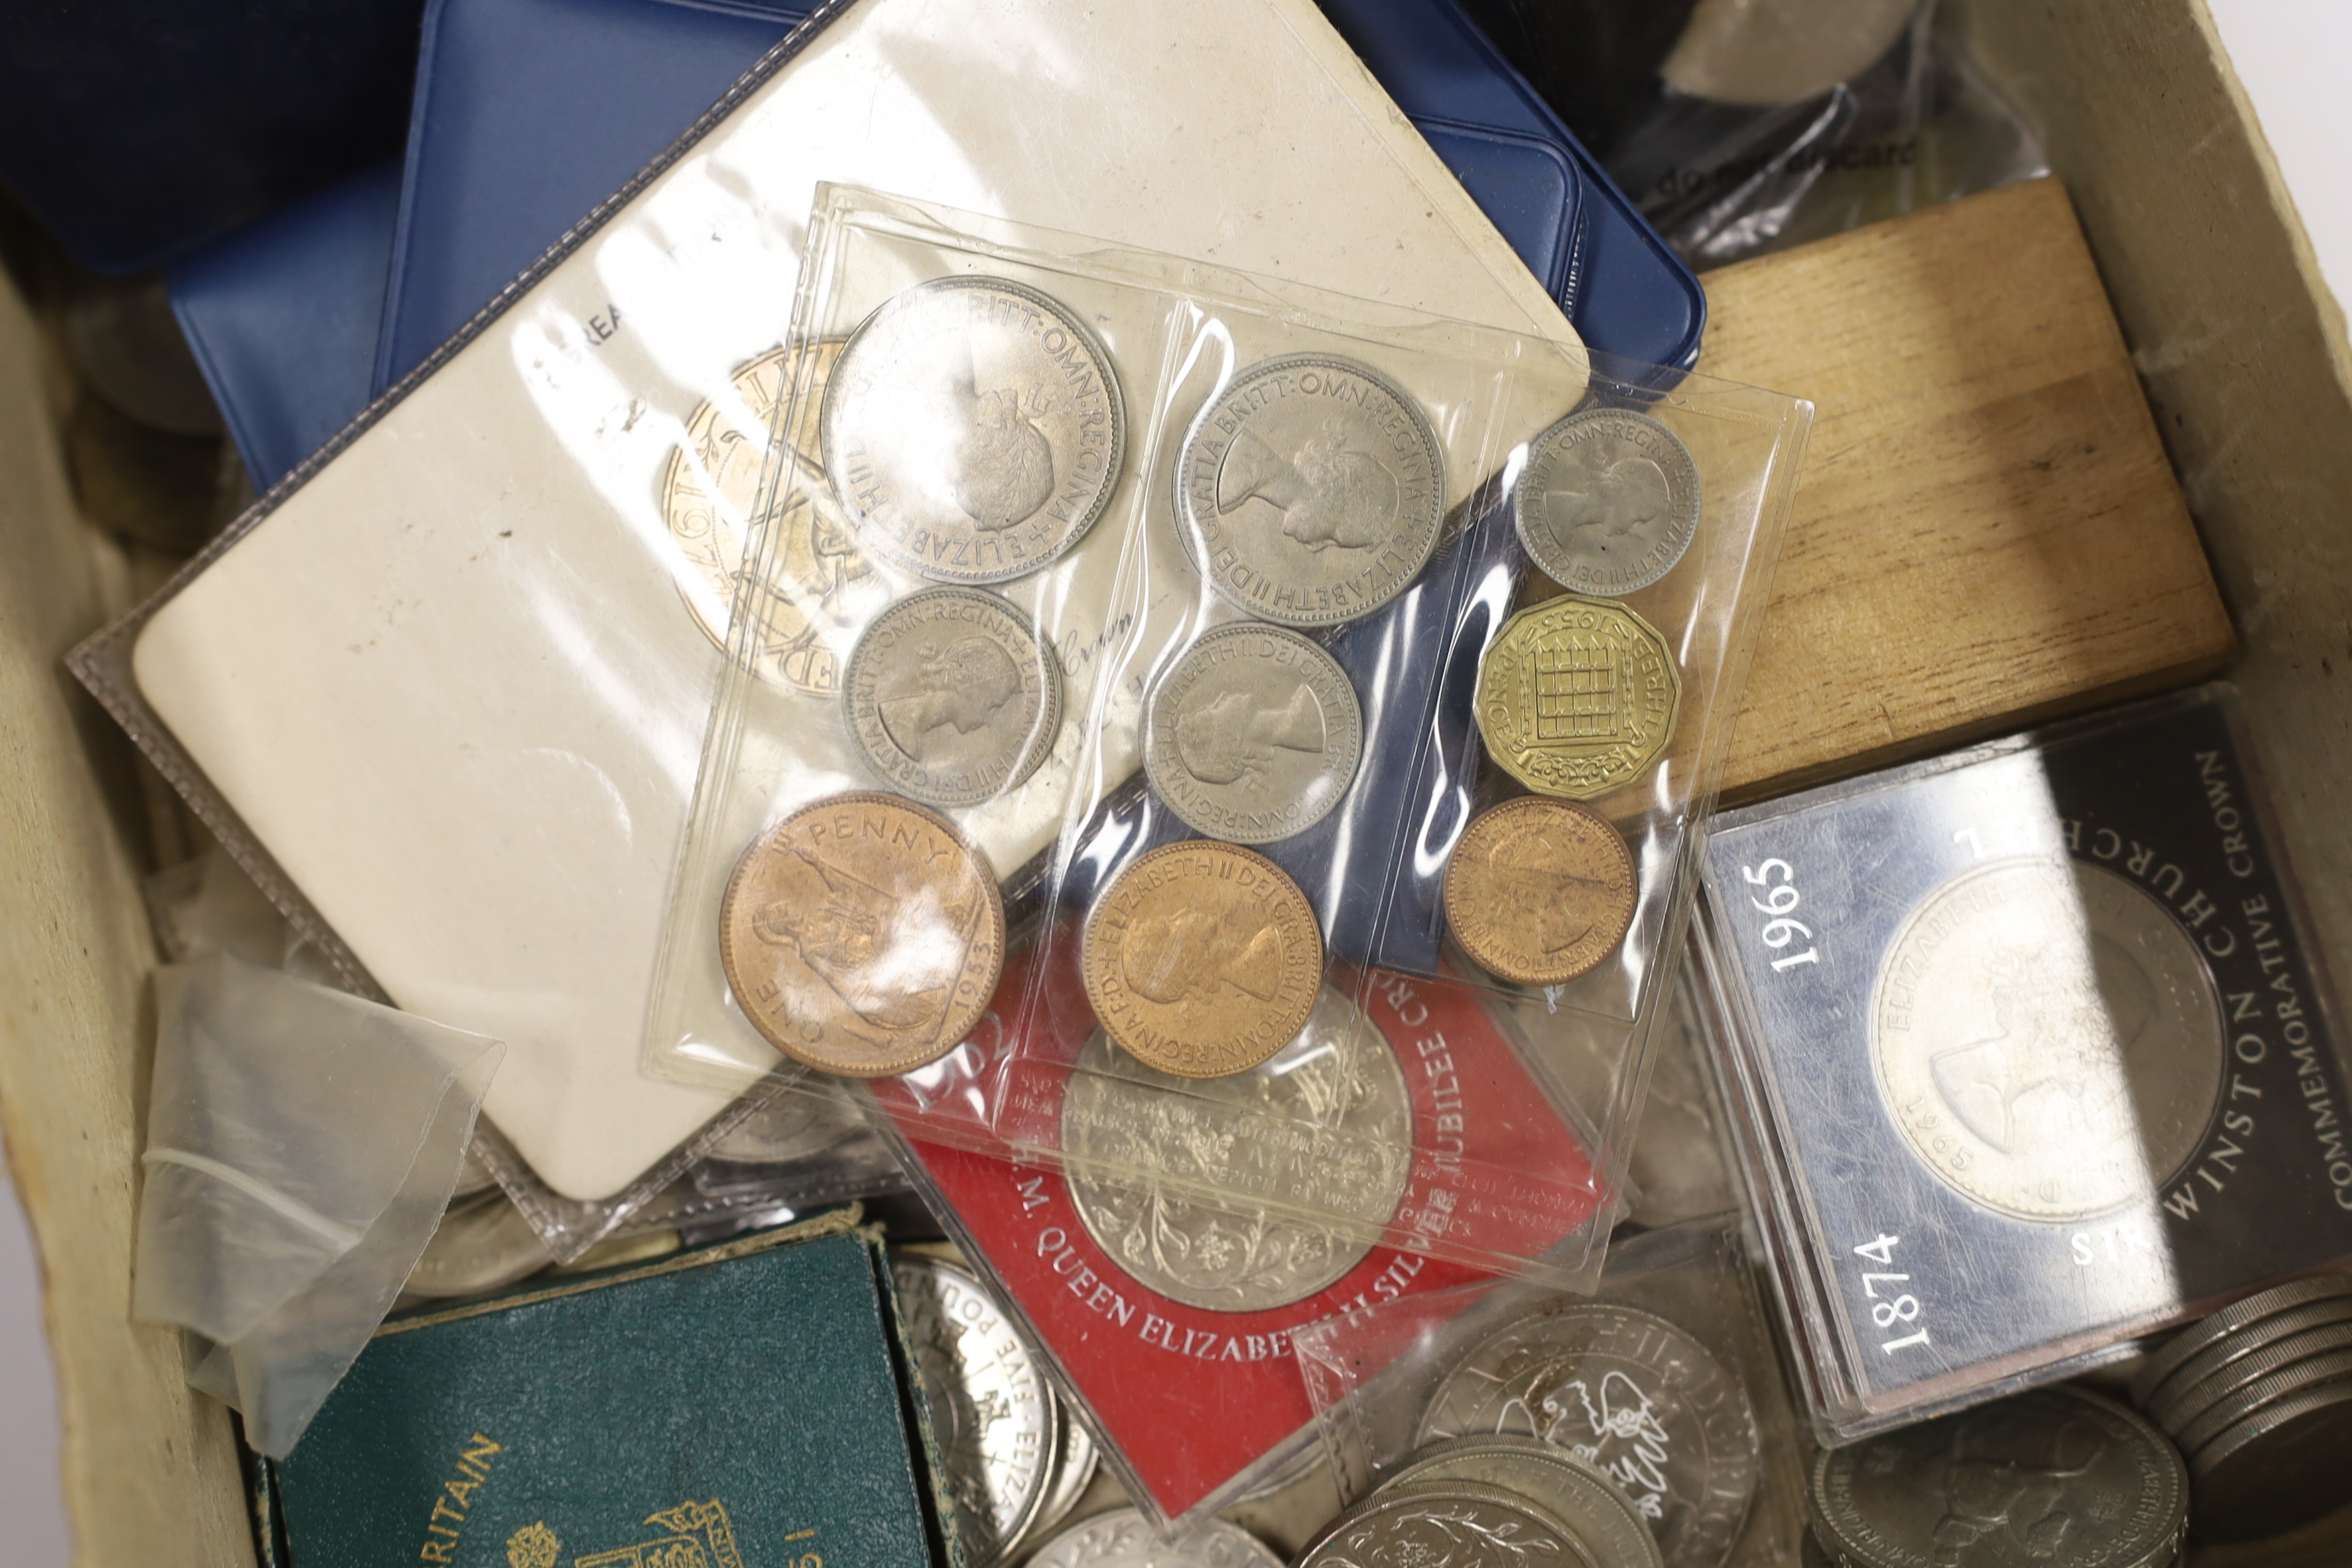 British coins, mostly QEII BUNC Decimal coin sets and commemorative crowns, Festival of Britain crowns 1951, together with Ireland coins